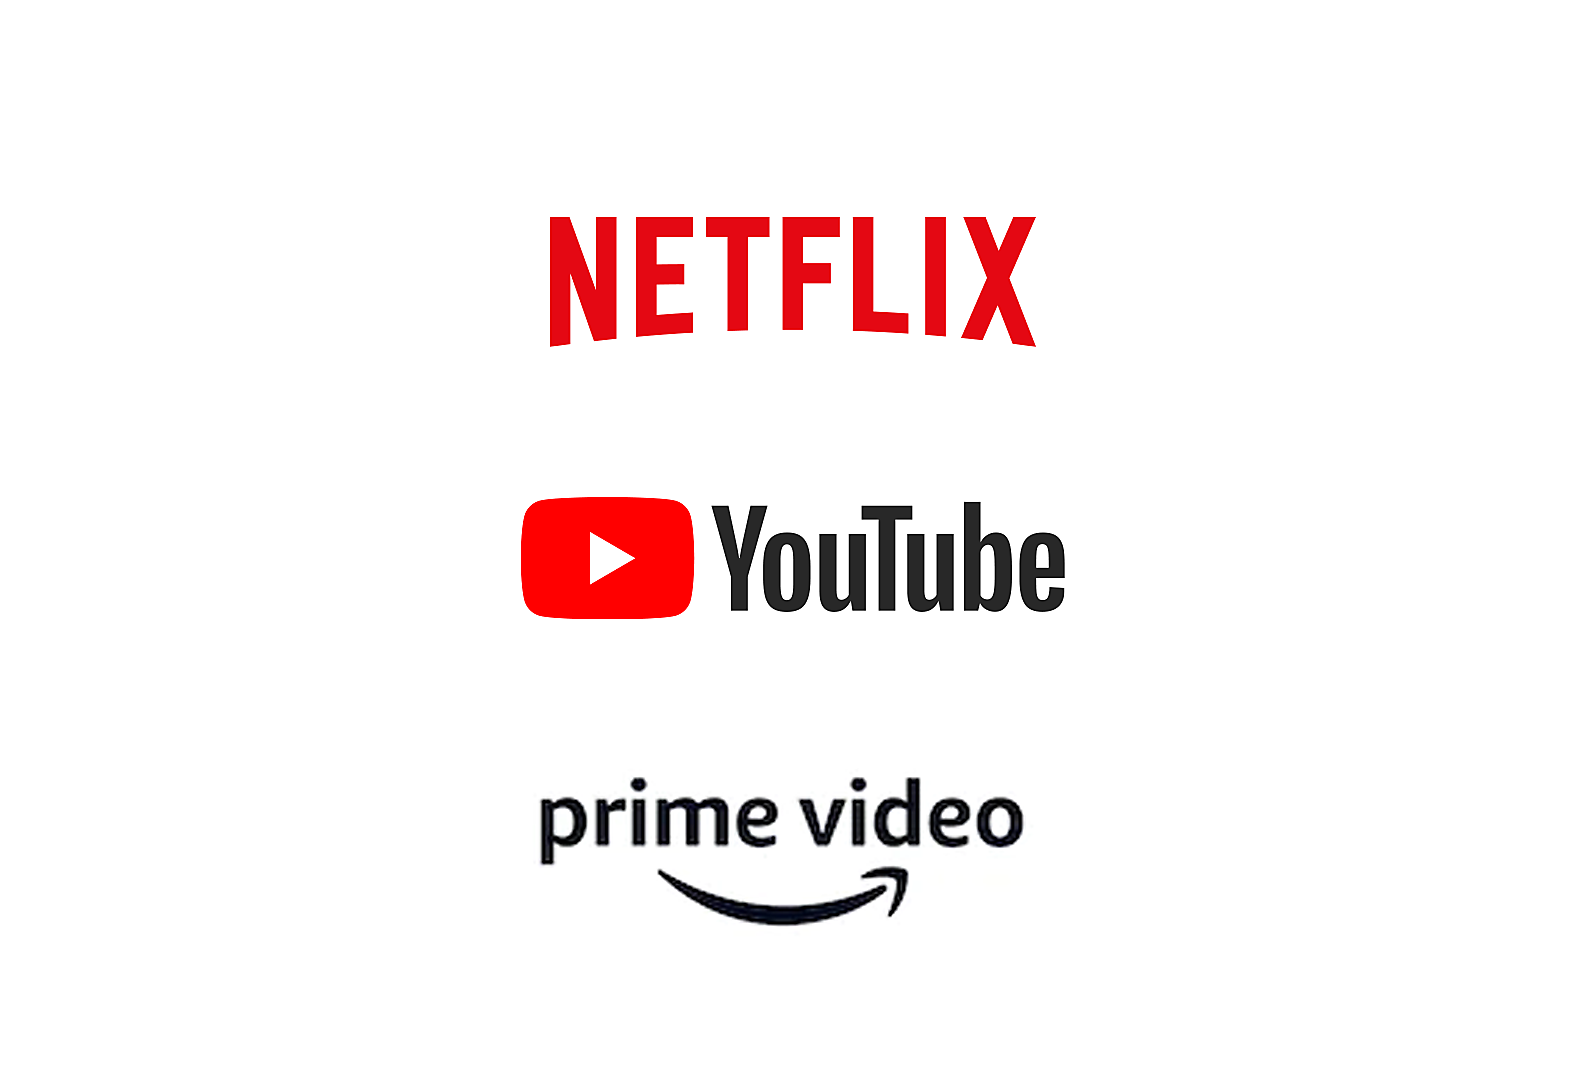 Logos for Netflix, YouTube and Amazon Prime Video